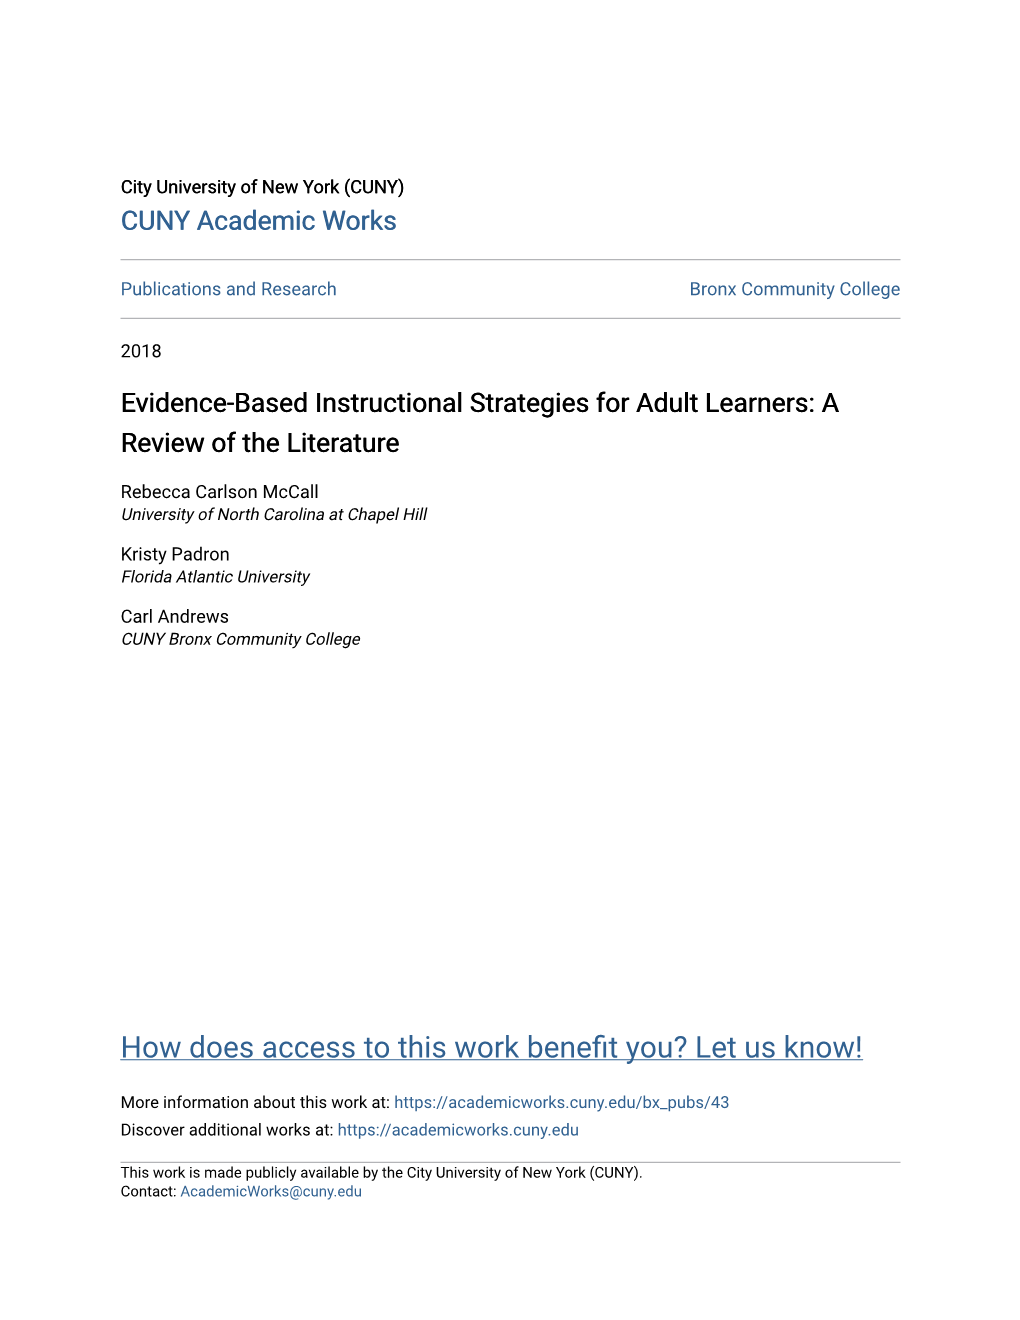 Evidence-Based Instructional Strategies for Adult Learners: a Review of the Literature